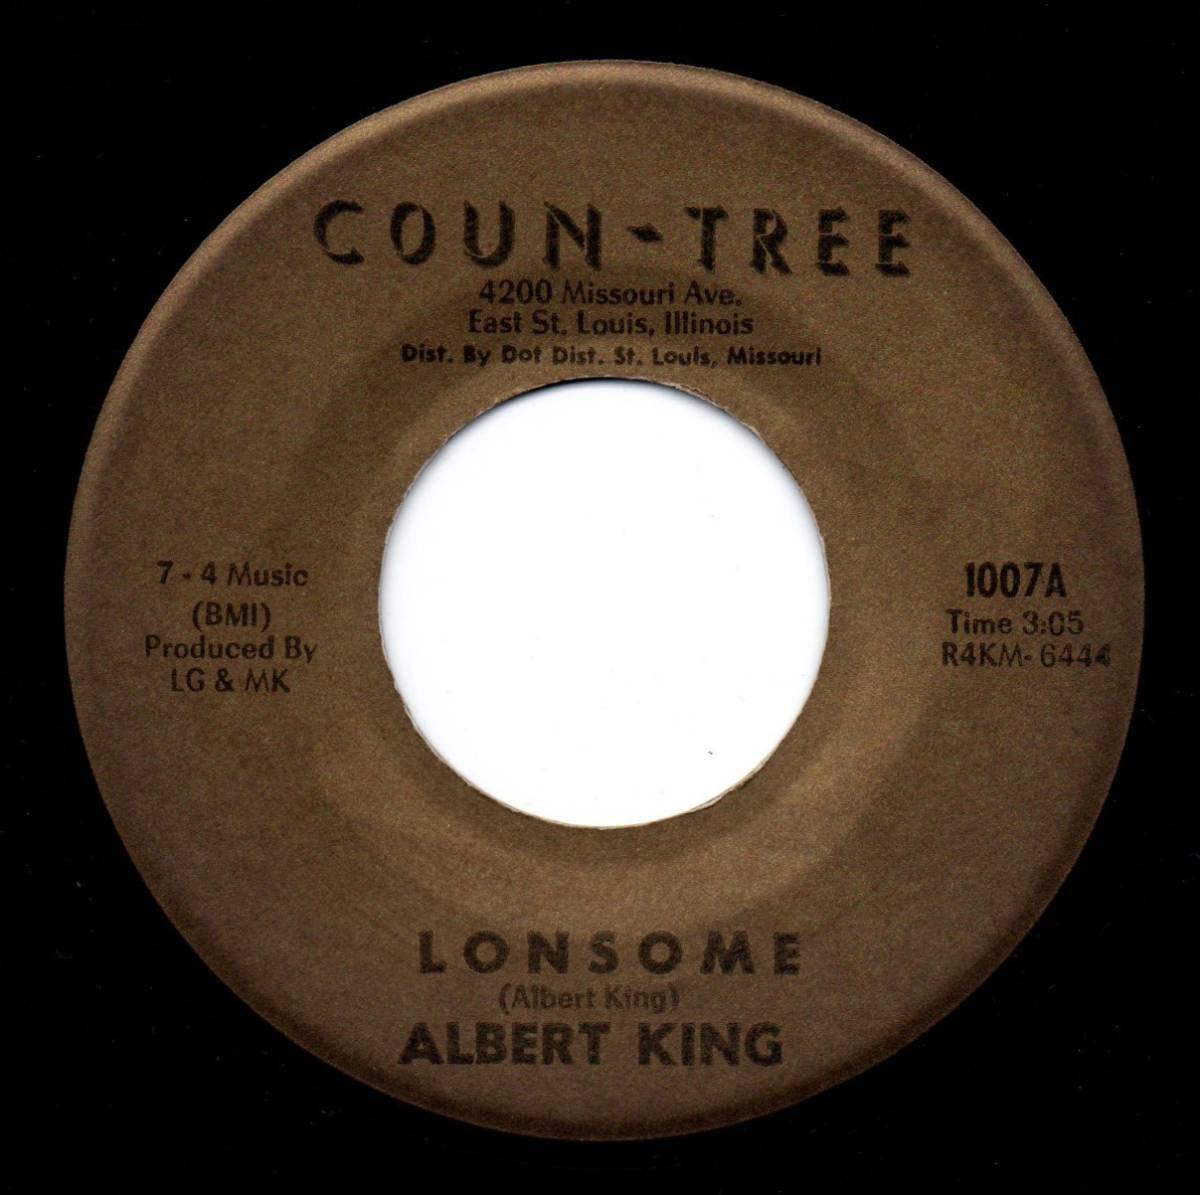 Albert King   Lonsome   You Threw Your Love On Me Too Strong (Coun Tree)